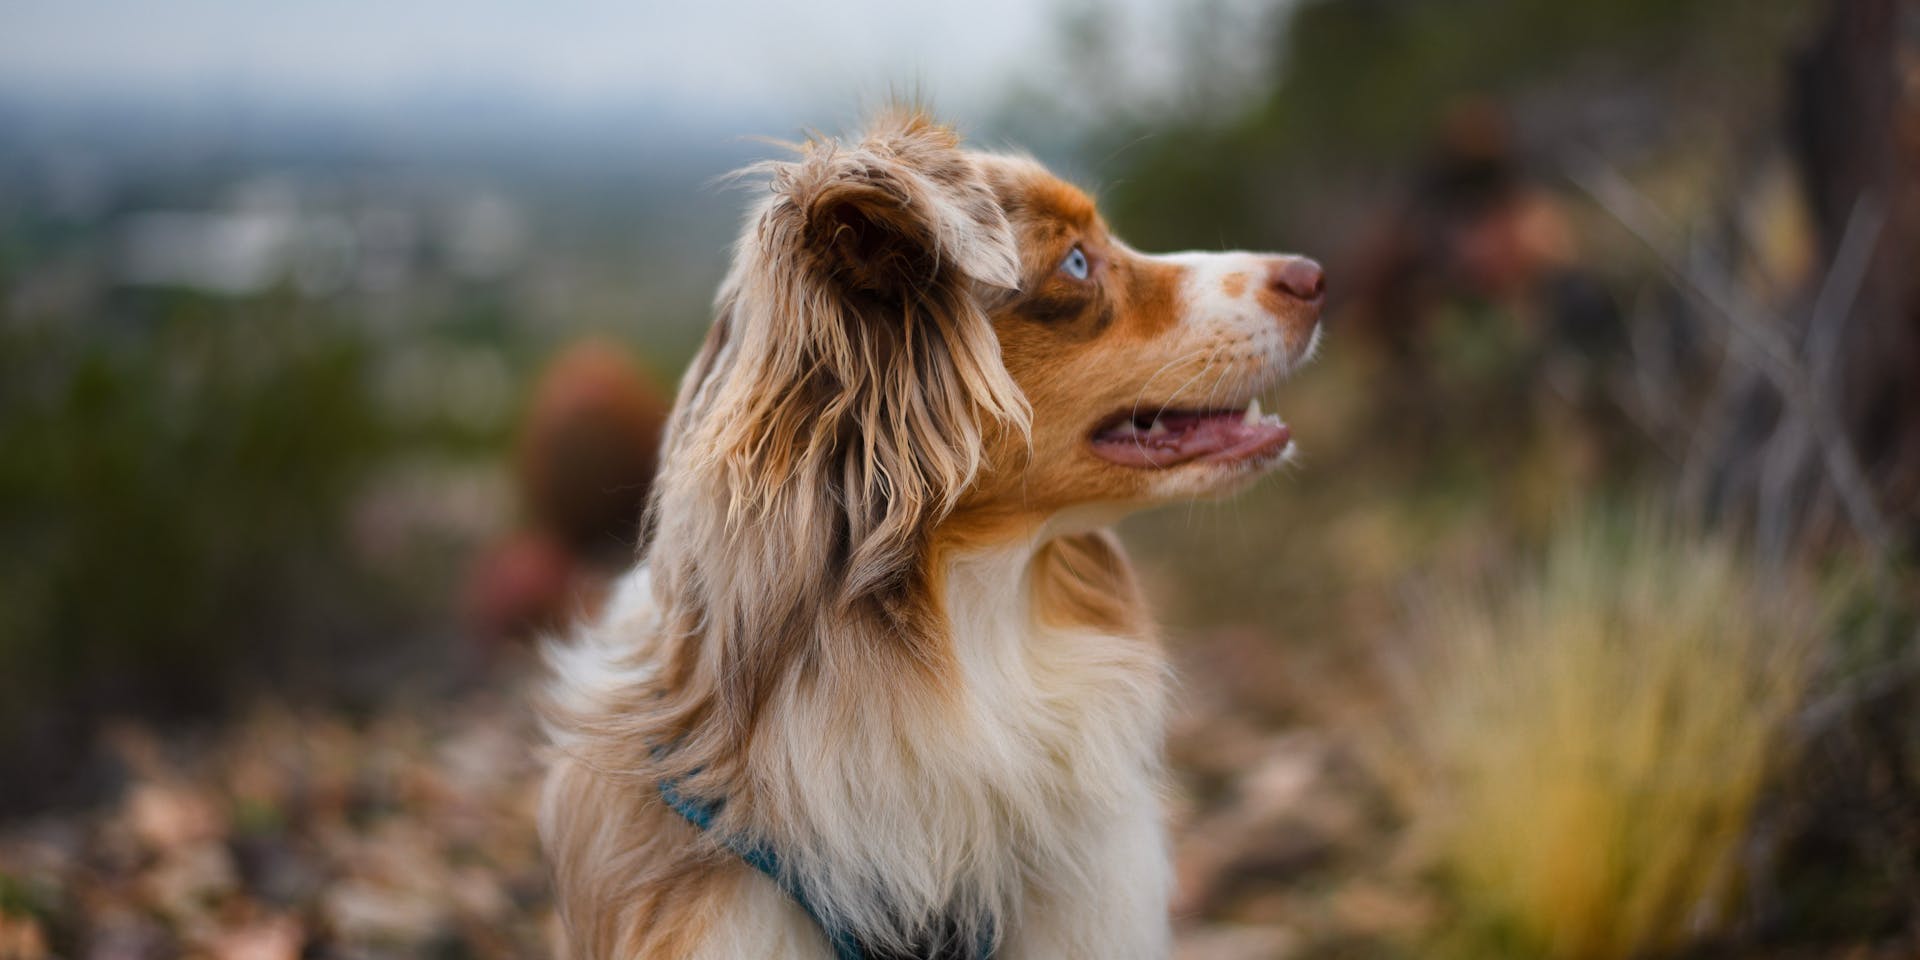 Blue eyed dog with a ginger coat outside in nature